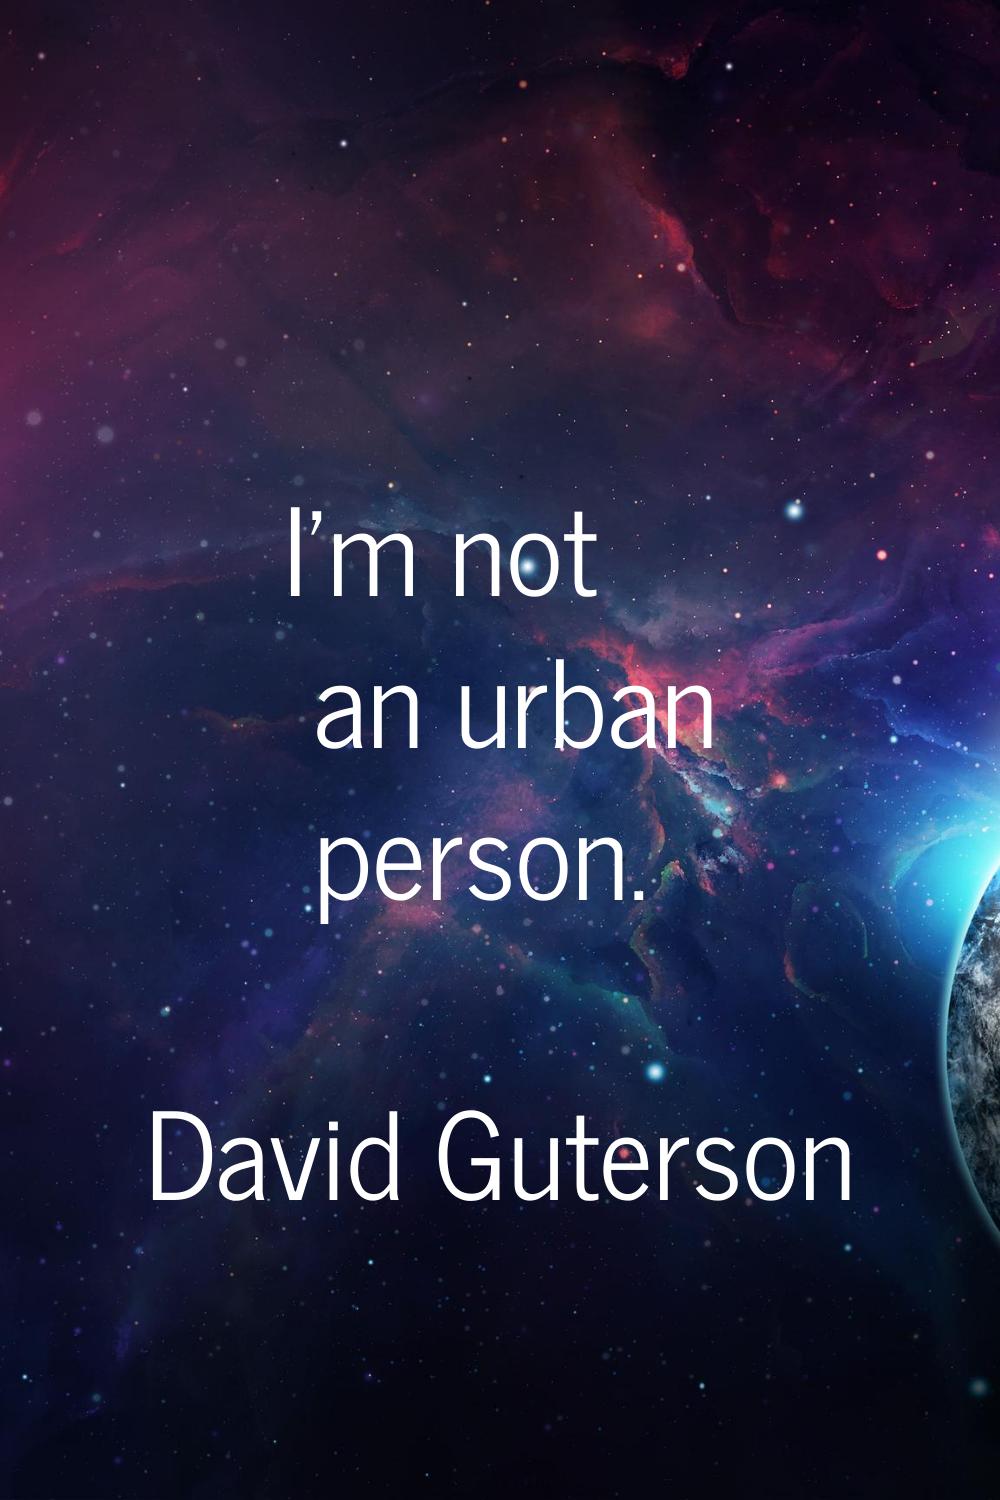 I'm not an urban person.